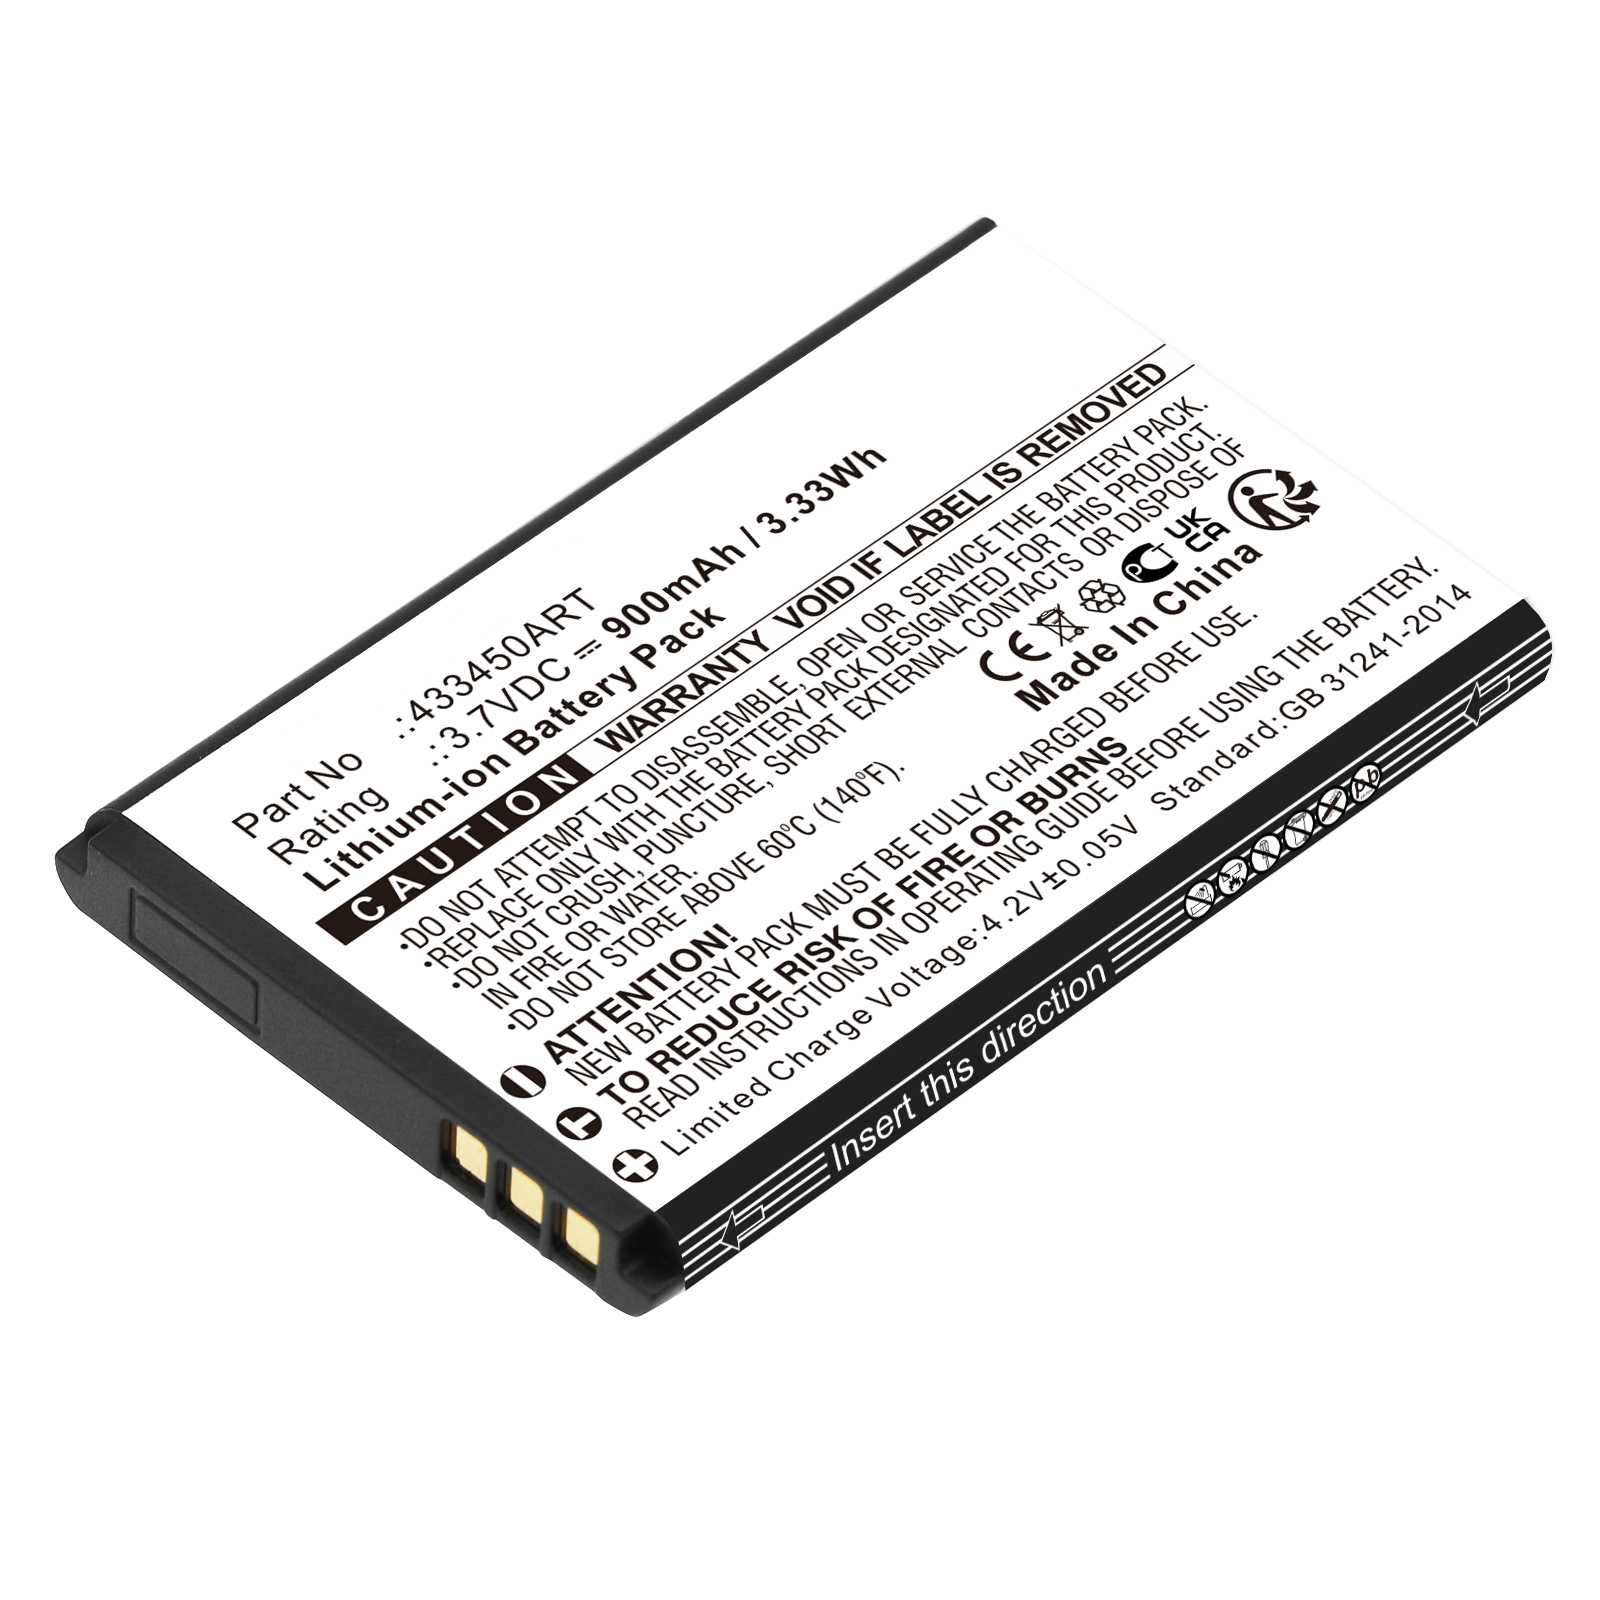 Synergy Digital Cell Phone Battery, Compatible with Panasonic 433450ART Cell Phone Battery (Li-ion, 3.7V, 900mAh)